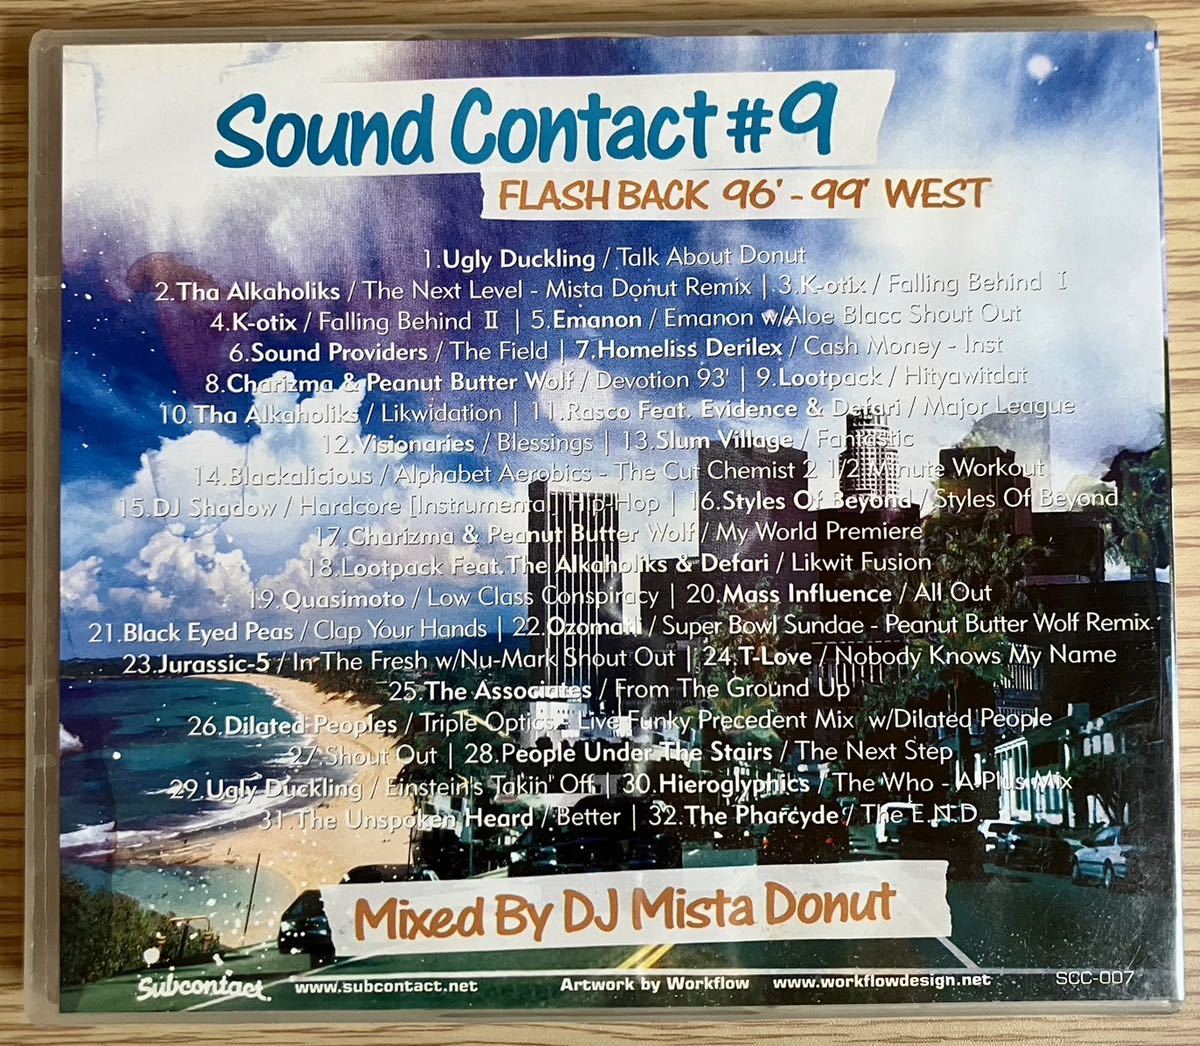 DJ MISTA DONUT sound contact #9 mixCD mix cd ugly duckling sound providers lootpack jurassic 5 pharcyde quasimoto stones throw_画像2